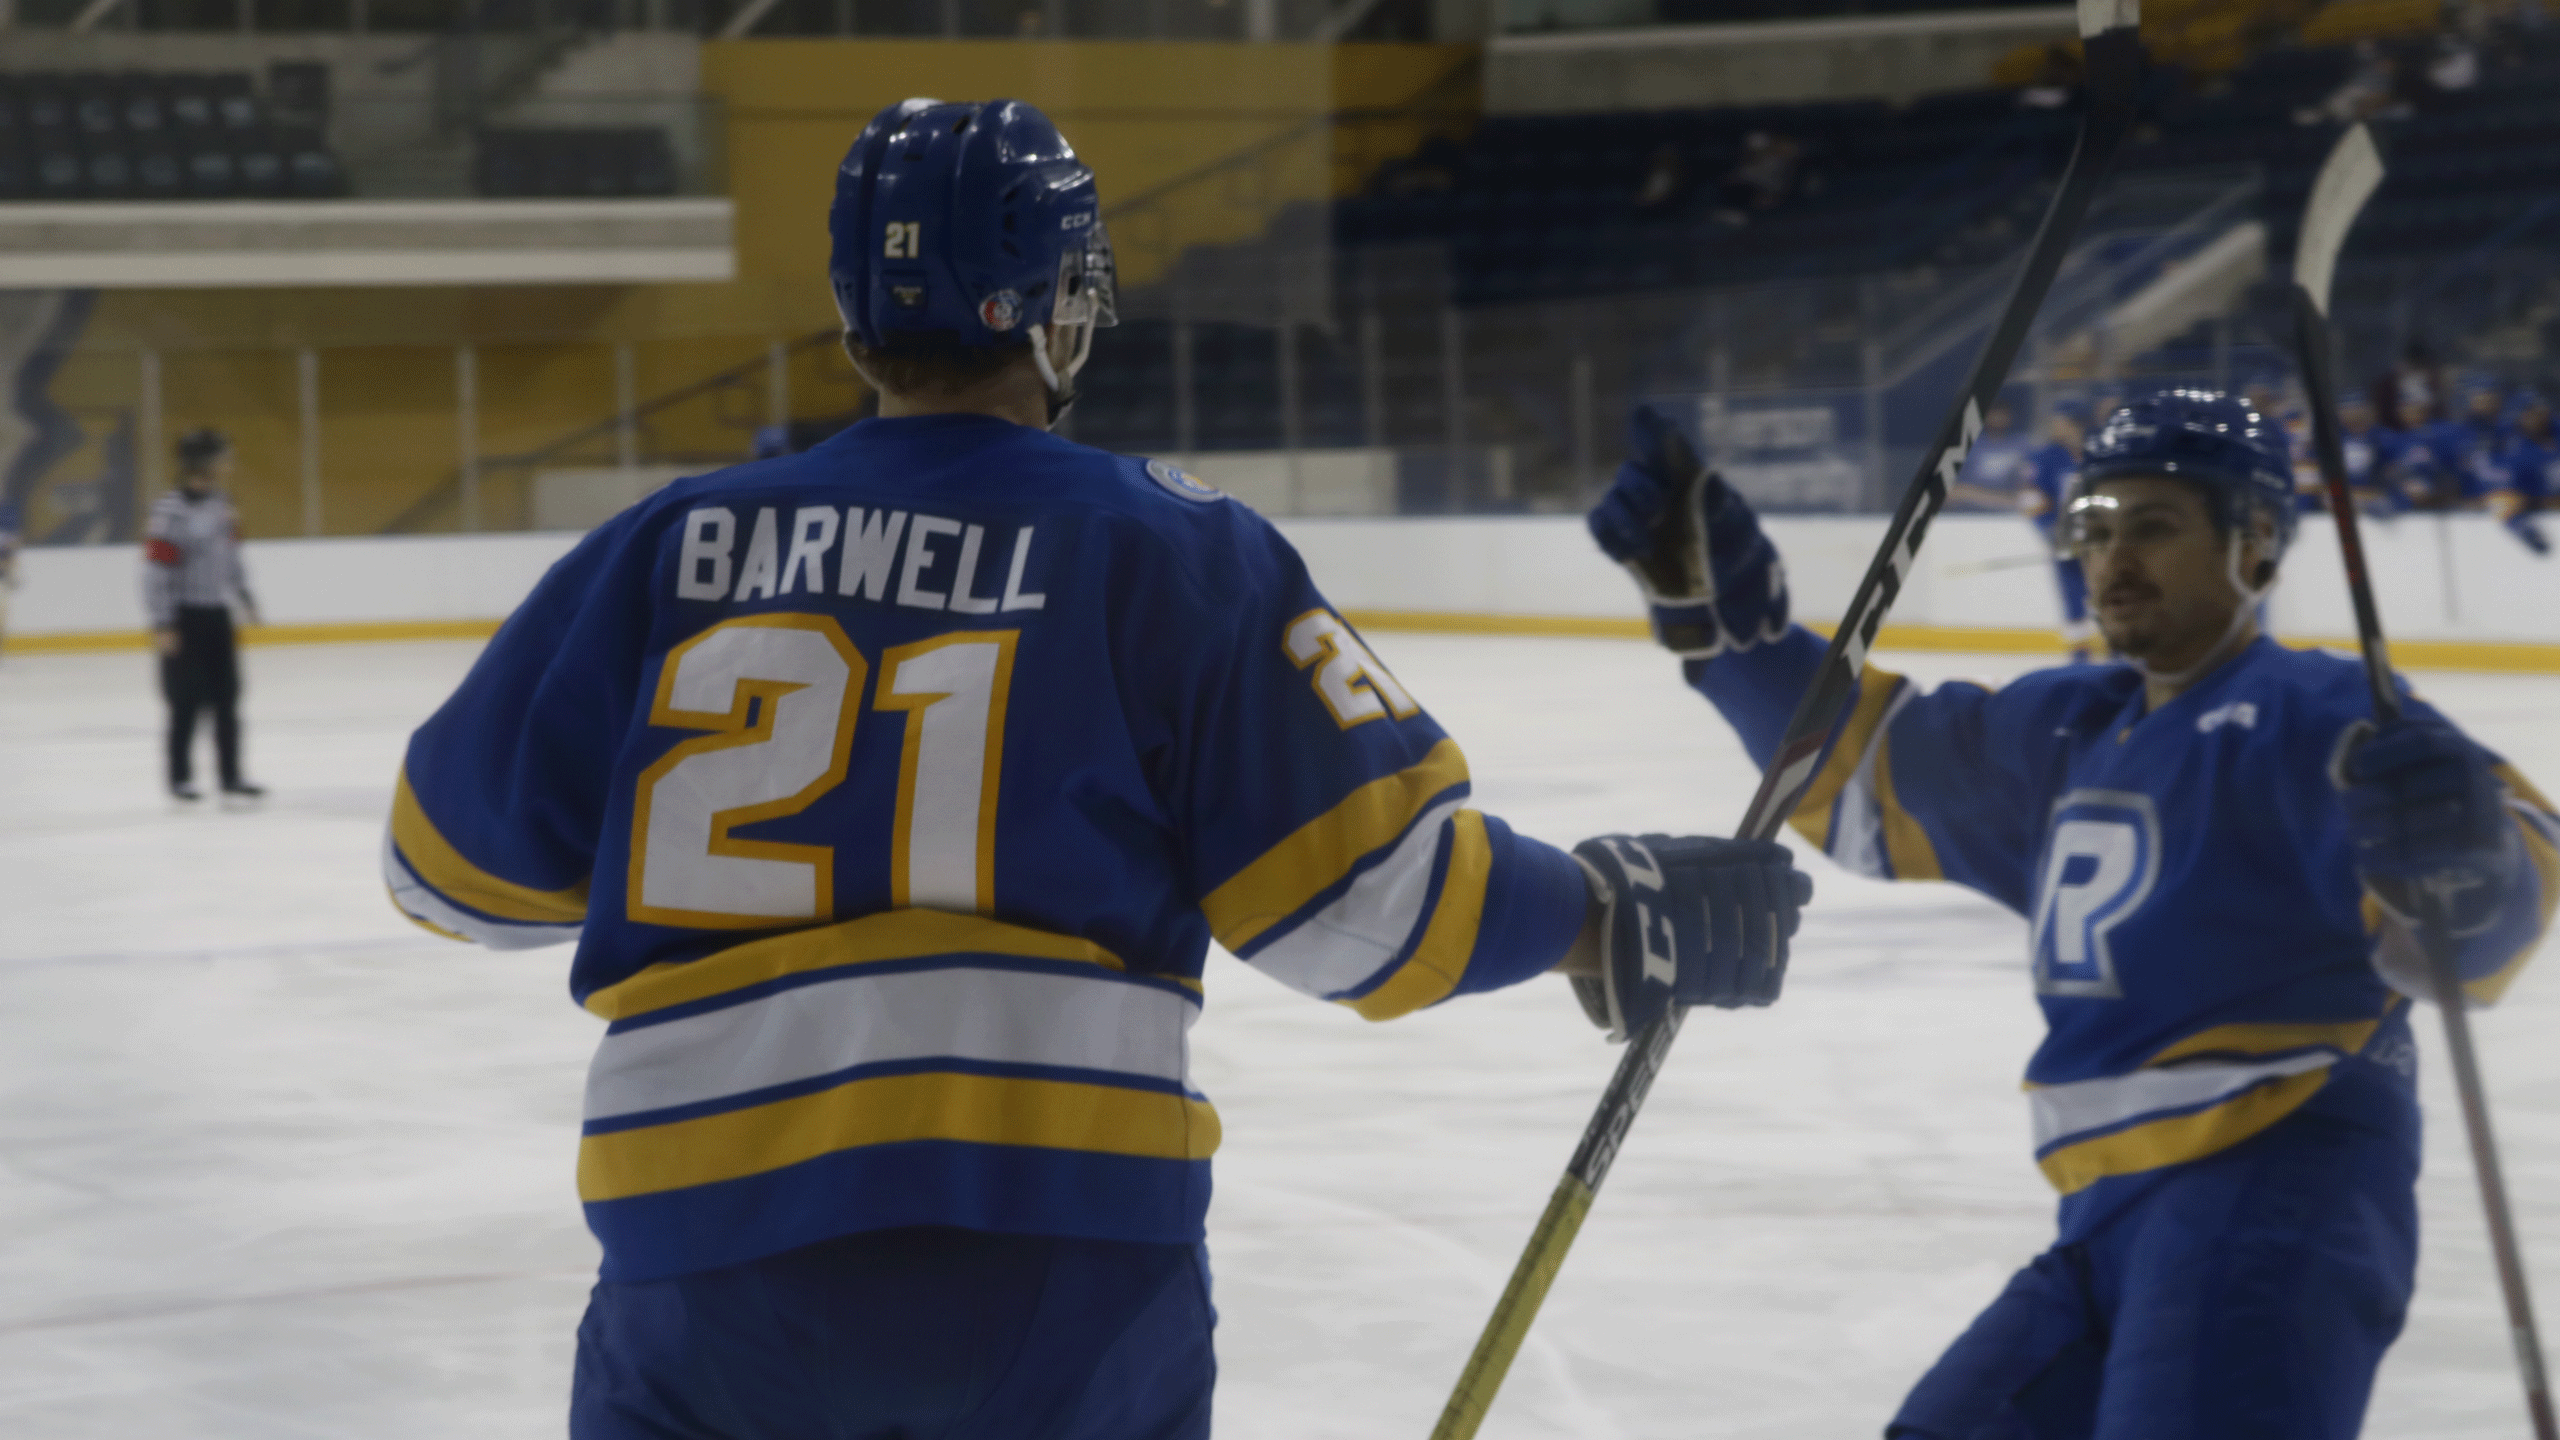 A hockey player in a blue jersey celebrates a goal